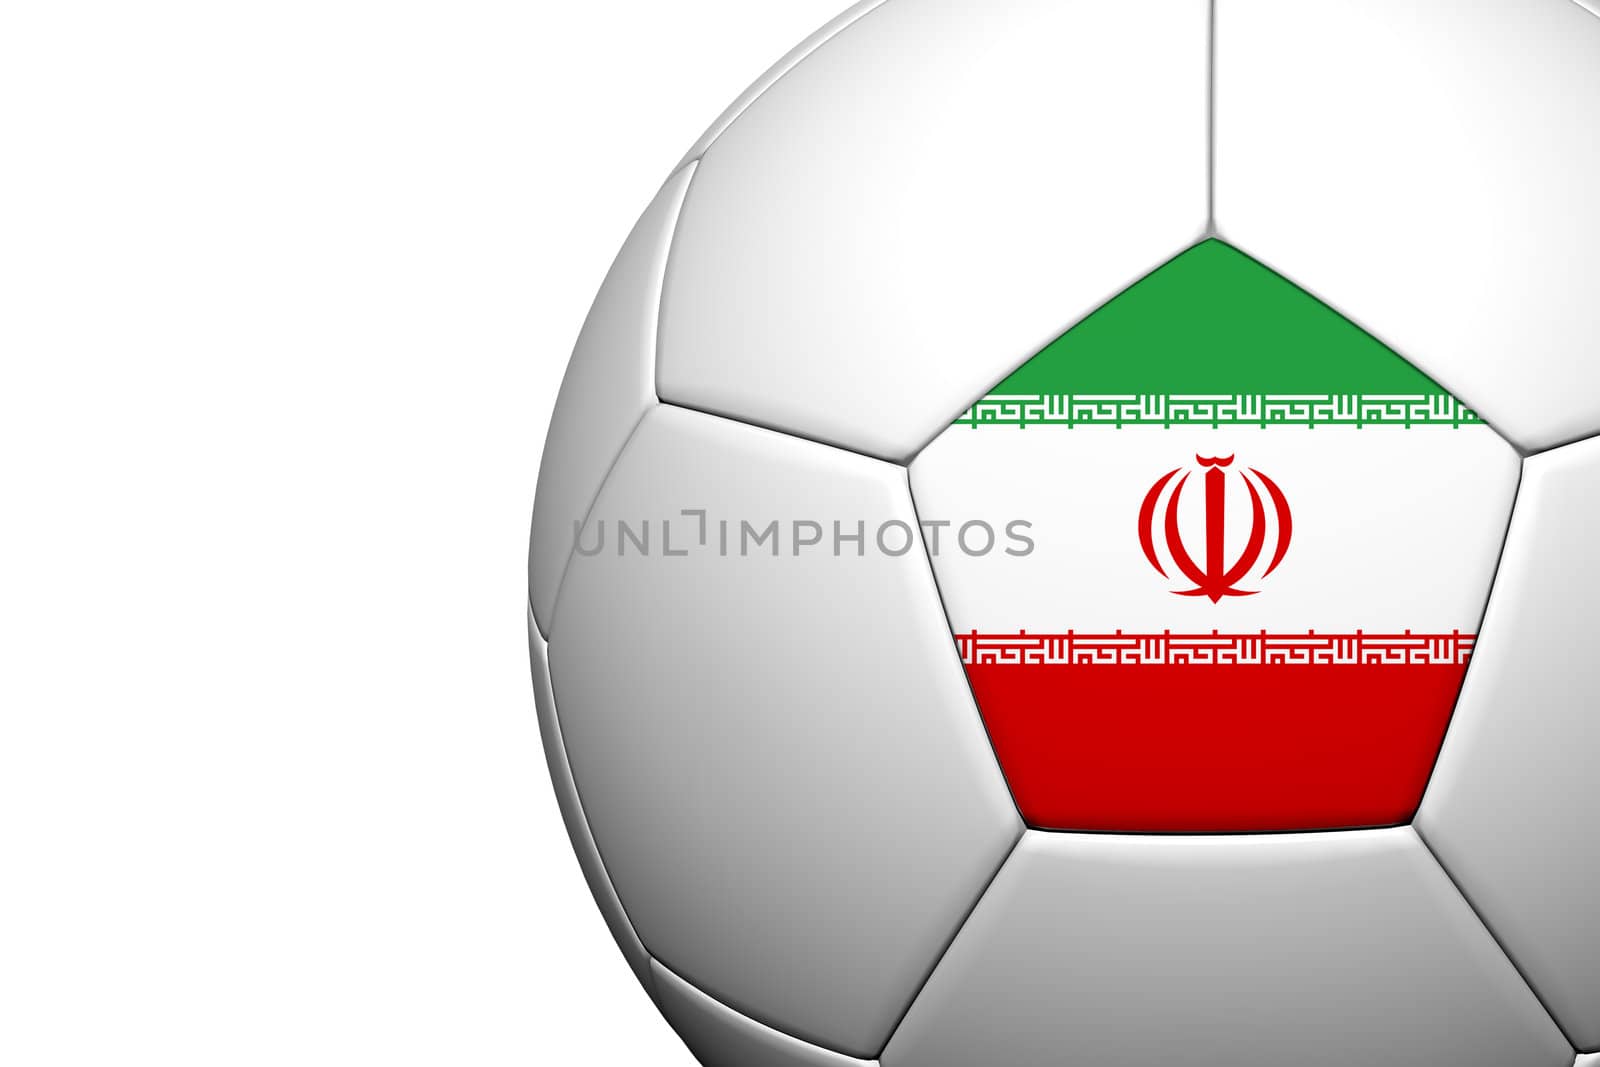 Iran Flag Pattern 3d rendering of a soccer ball